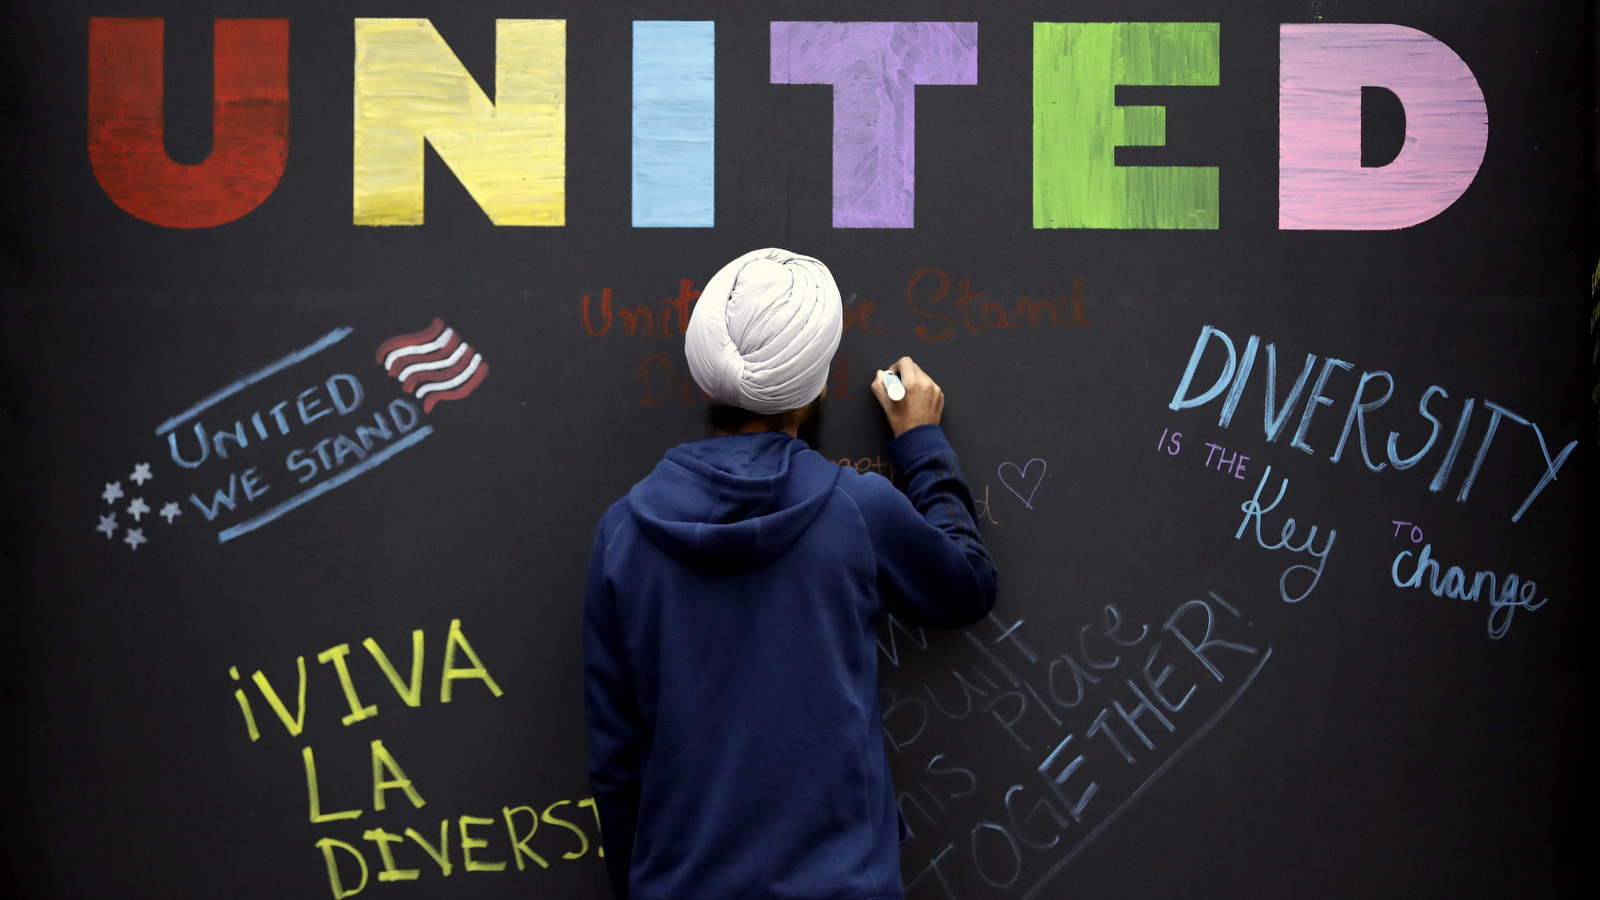 Texas A&M student Harsimran Singh, from India, signs a message board outside Kyle Field where an "Aggies United" event is scheduled for Tuesday evening at Texas A&M University Tuesday, Dec. 6, 2016, in College Station, Texas. The event is taking place at the same time Richard Spencer, who leads a movement that mixes racism, white nationalism and populism, is set to speak at a separate event at the university after being invited by a former student. (AP Photo/David J. Phillip)